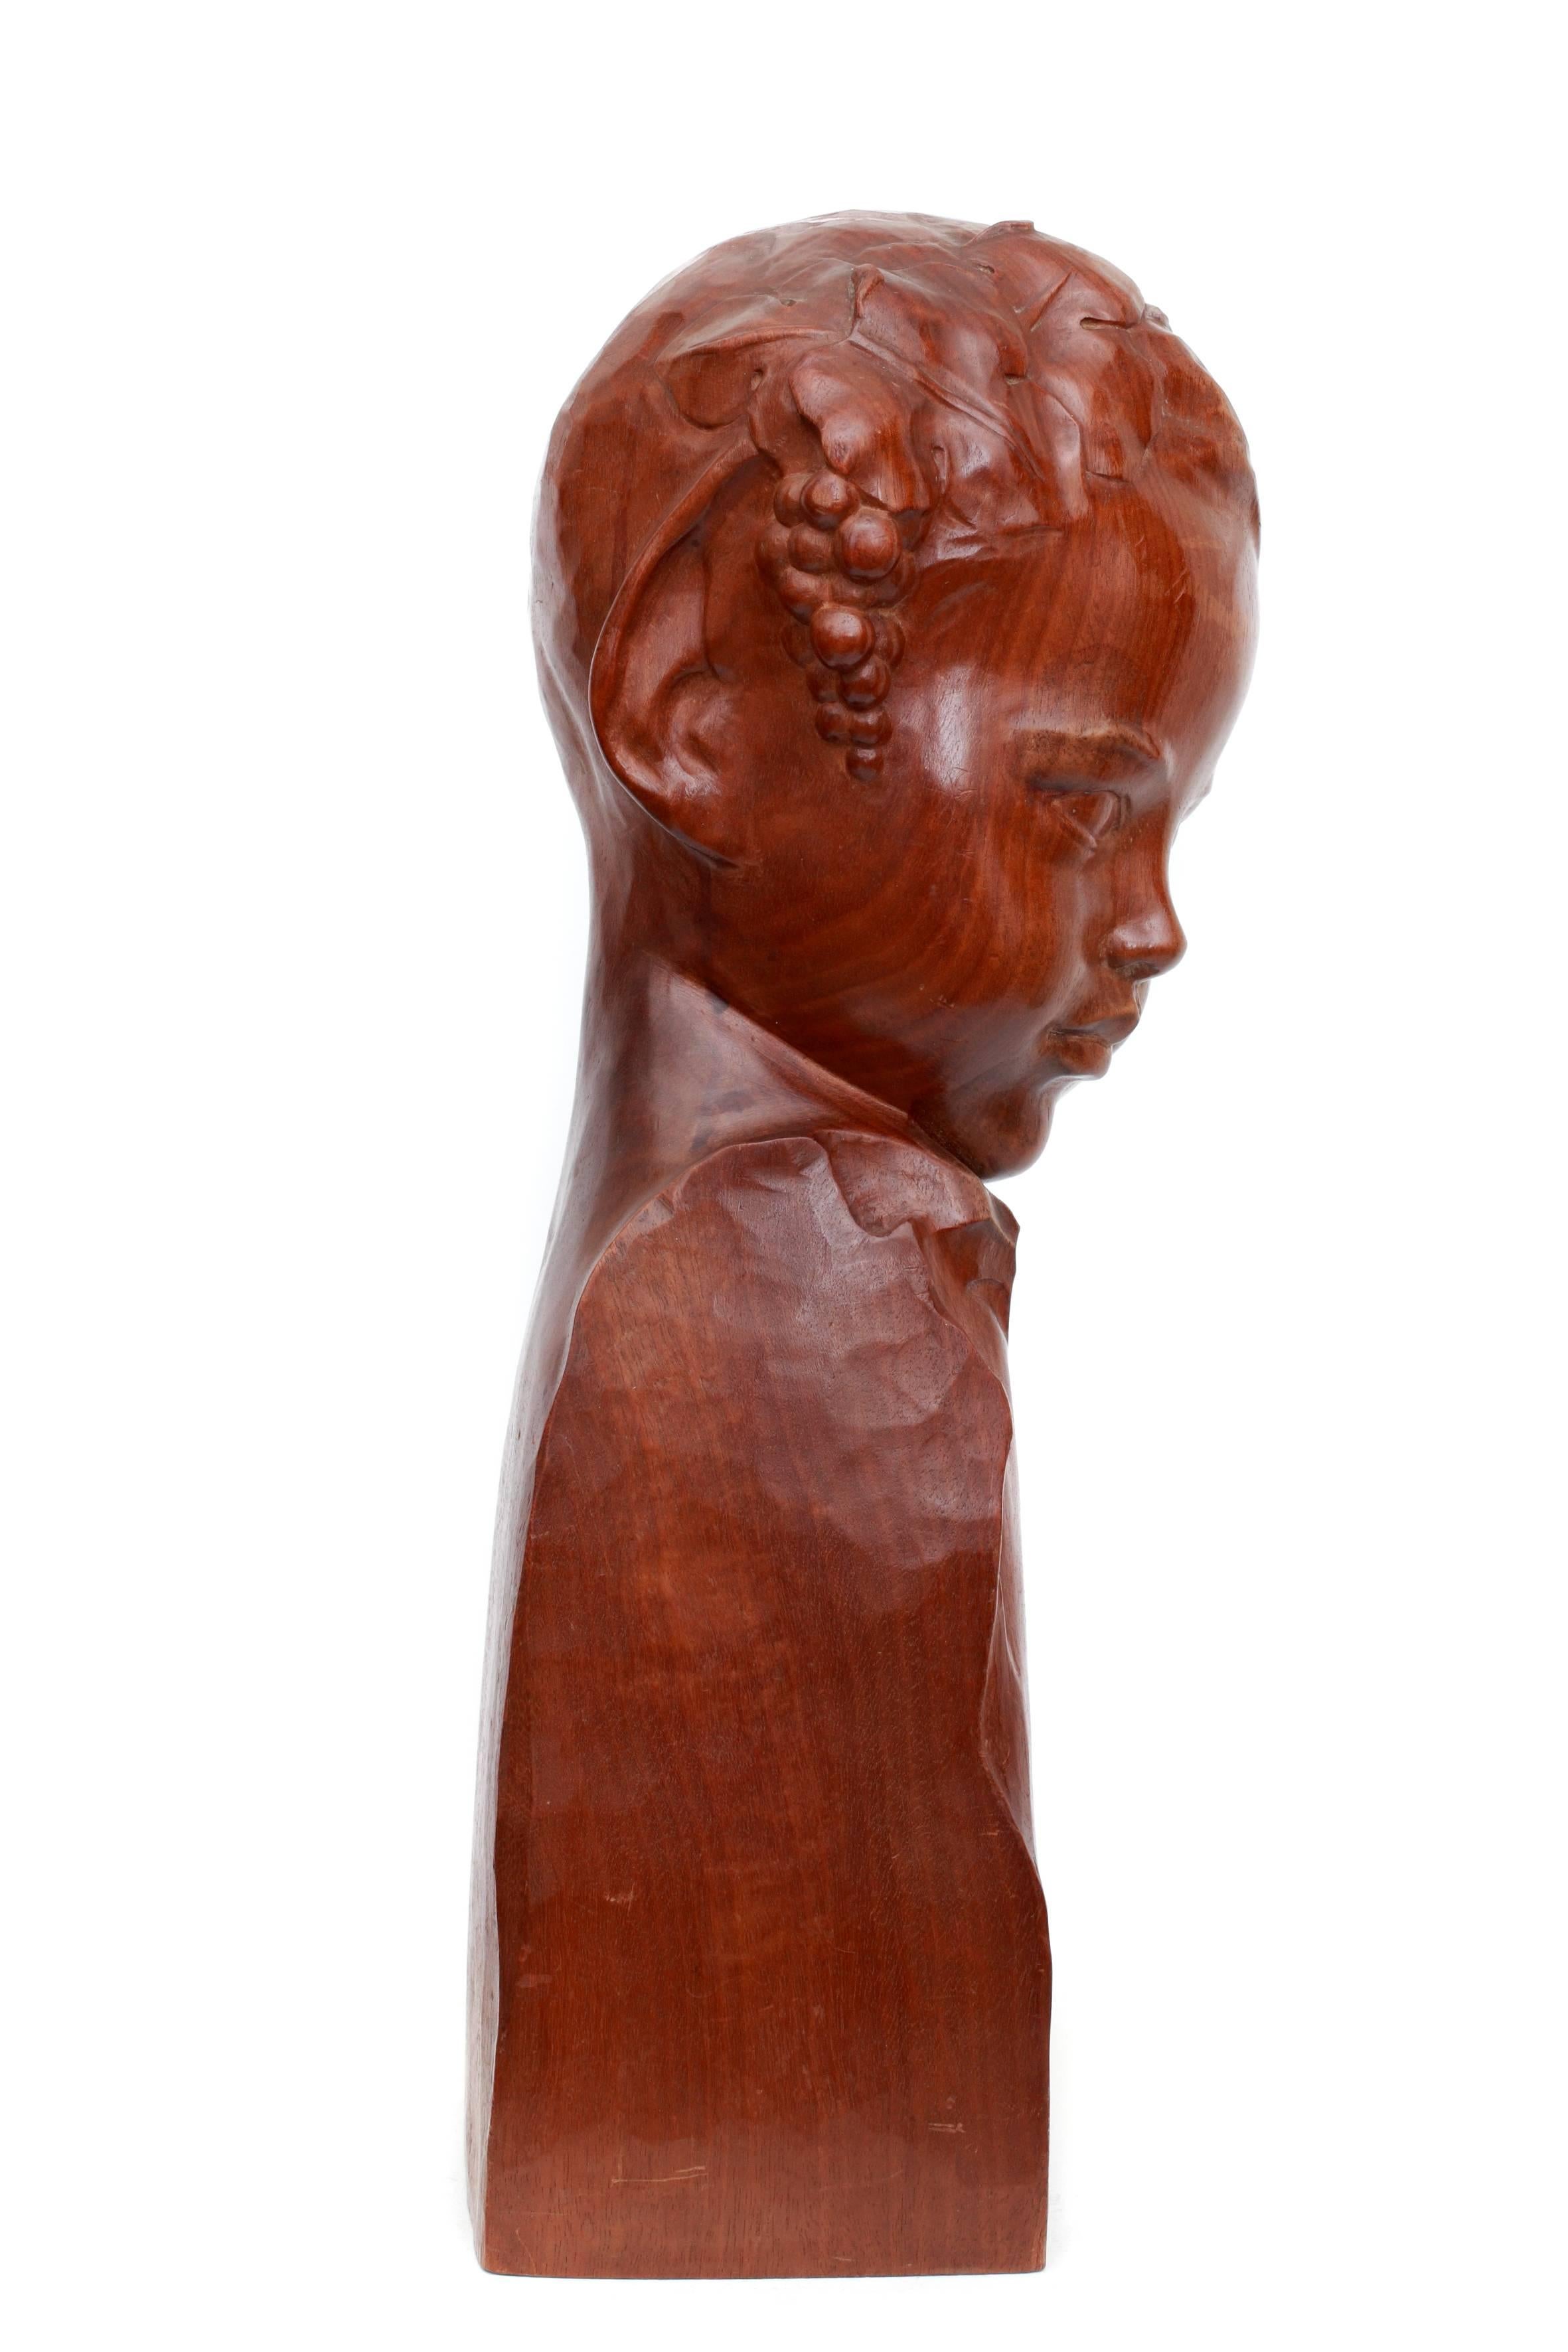 Carved Head of a Young Bacchante Wearing Wine Tendrils in her Hair For Sale